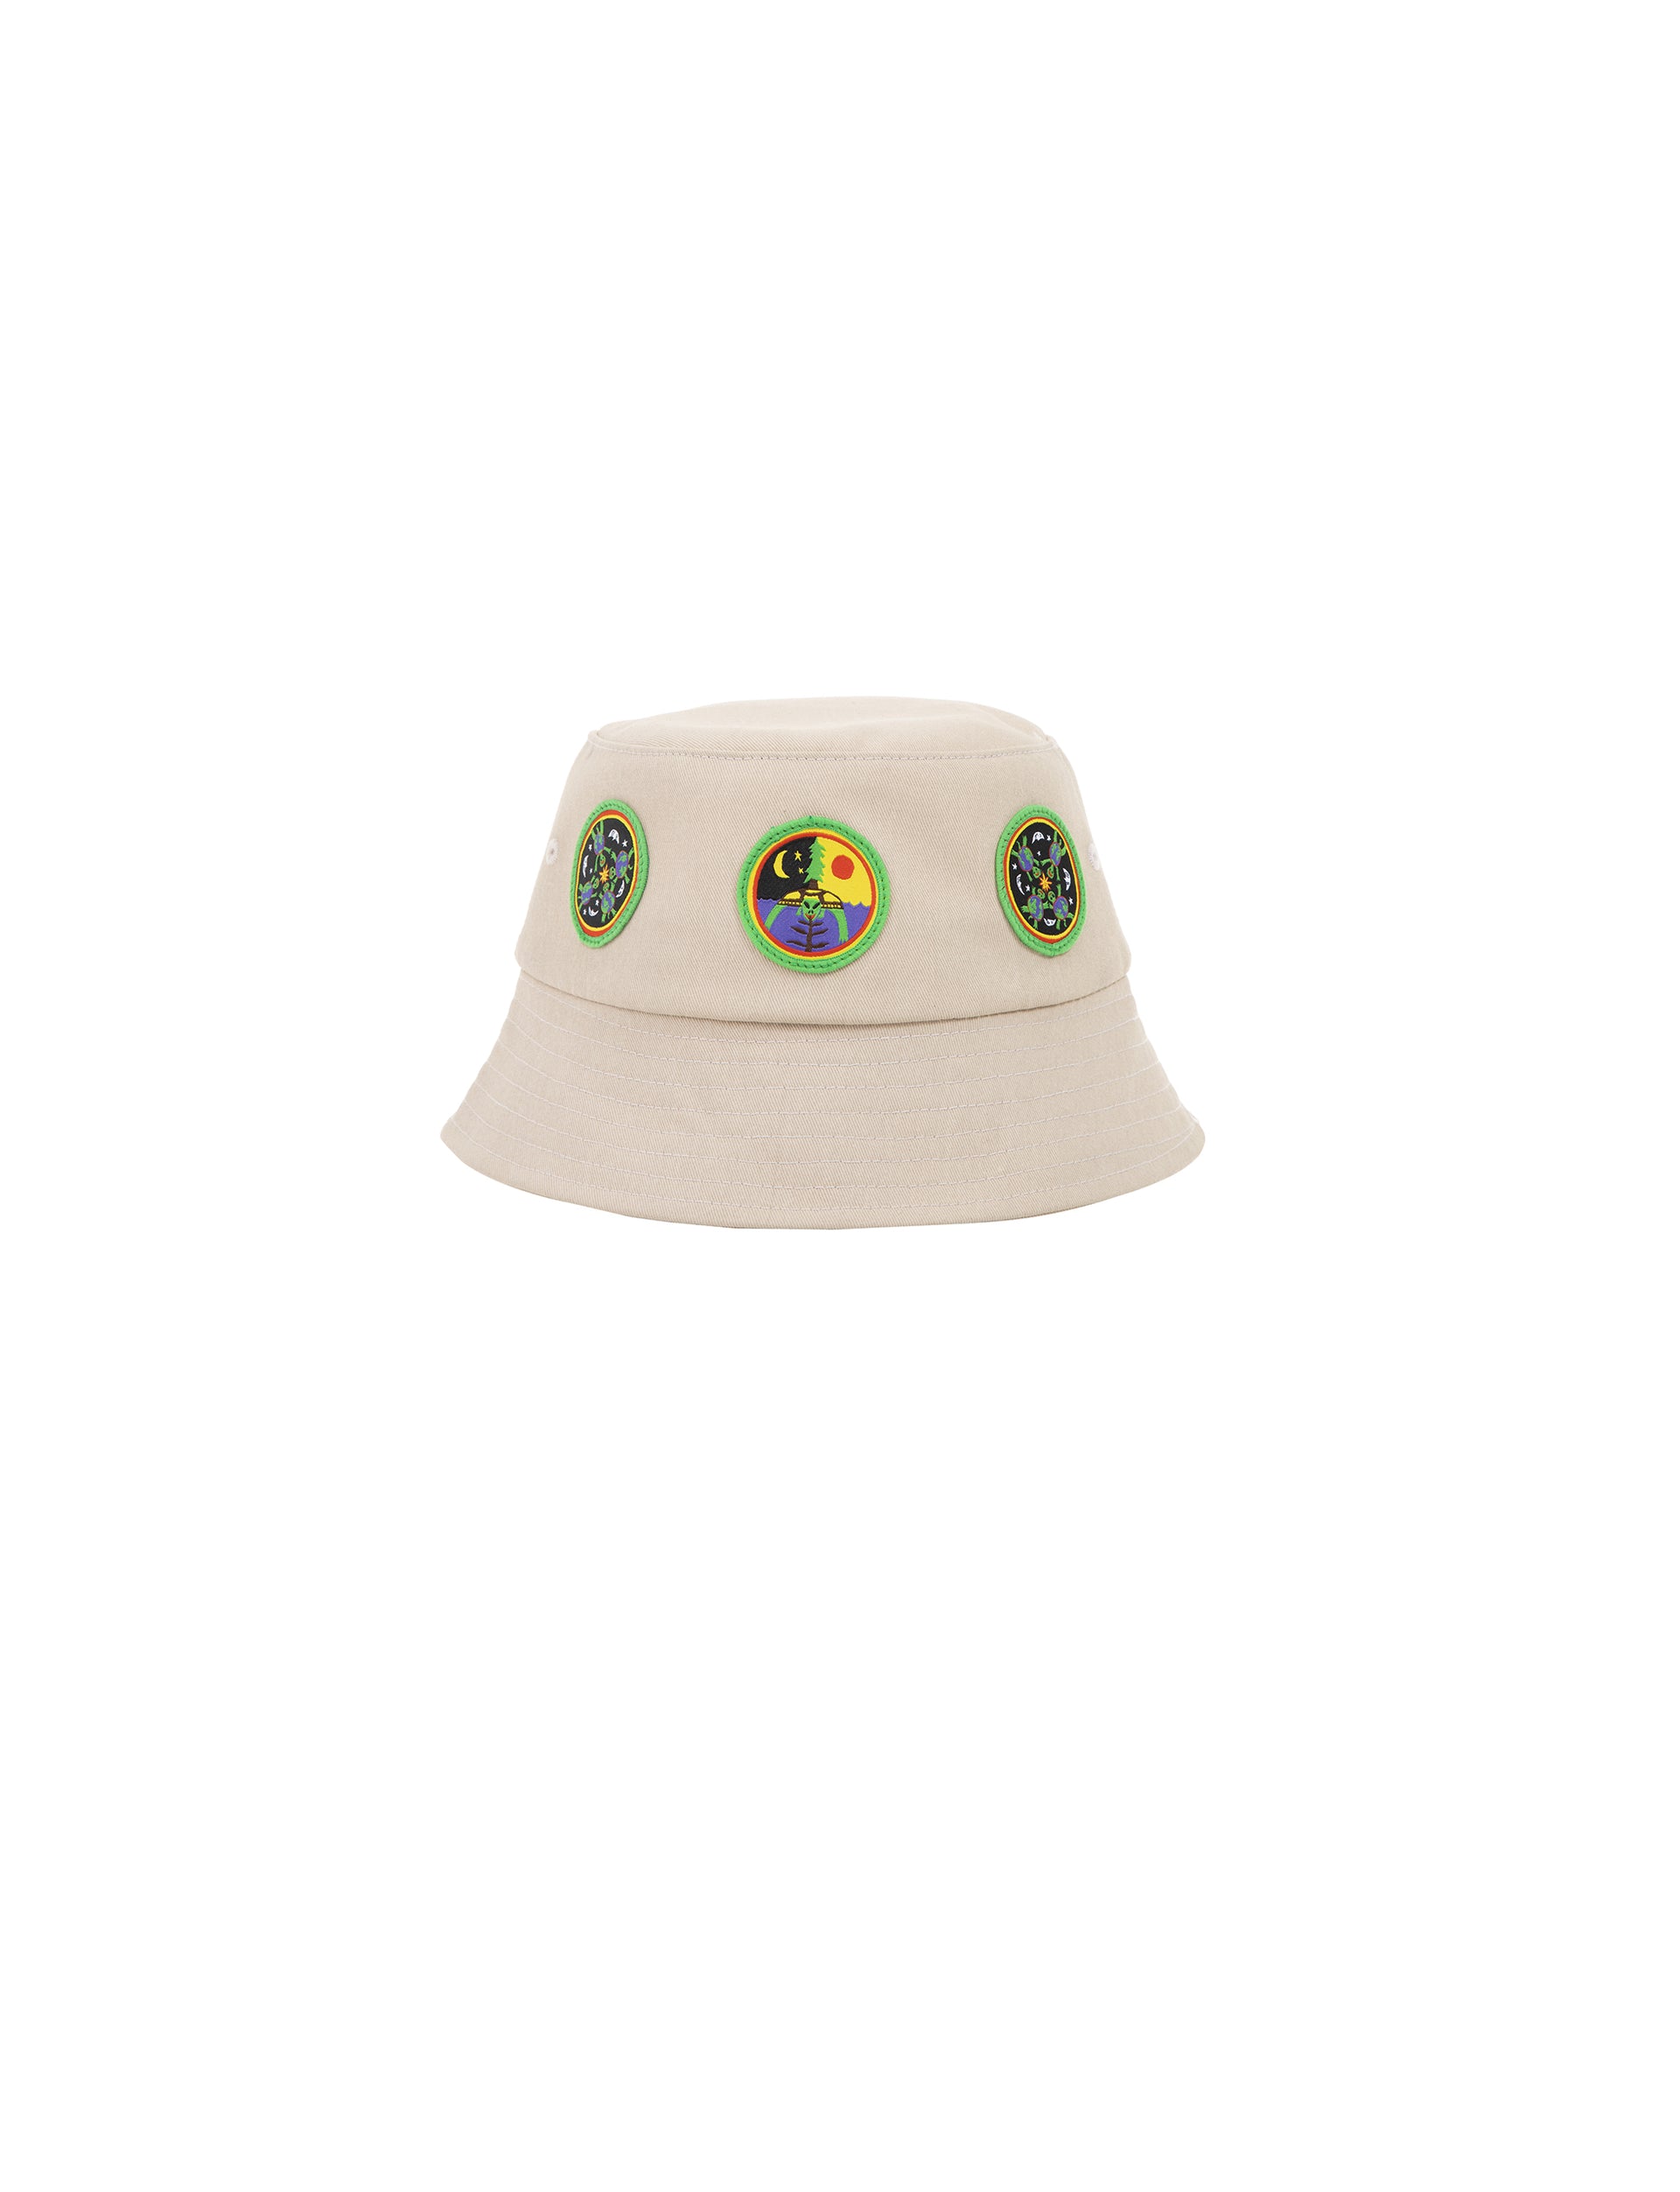 TURTLE ISLAND MEDITATION TIME PATCHES BUCKET HAT